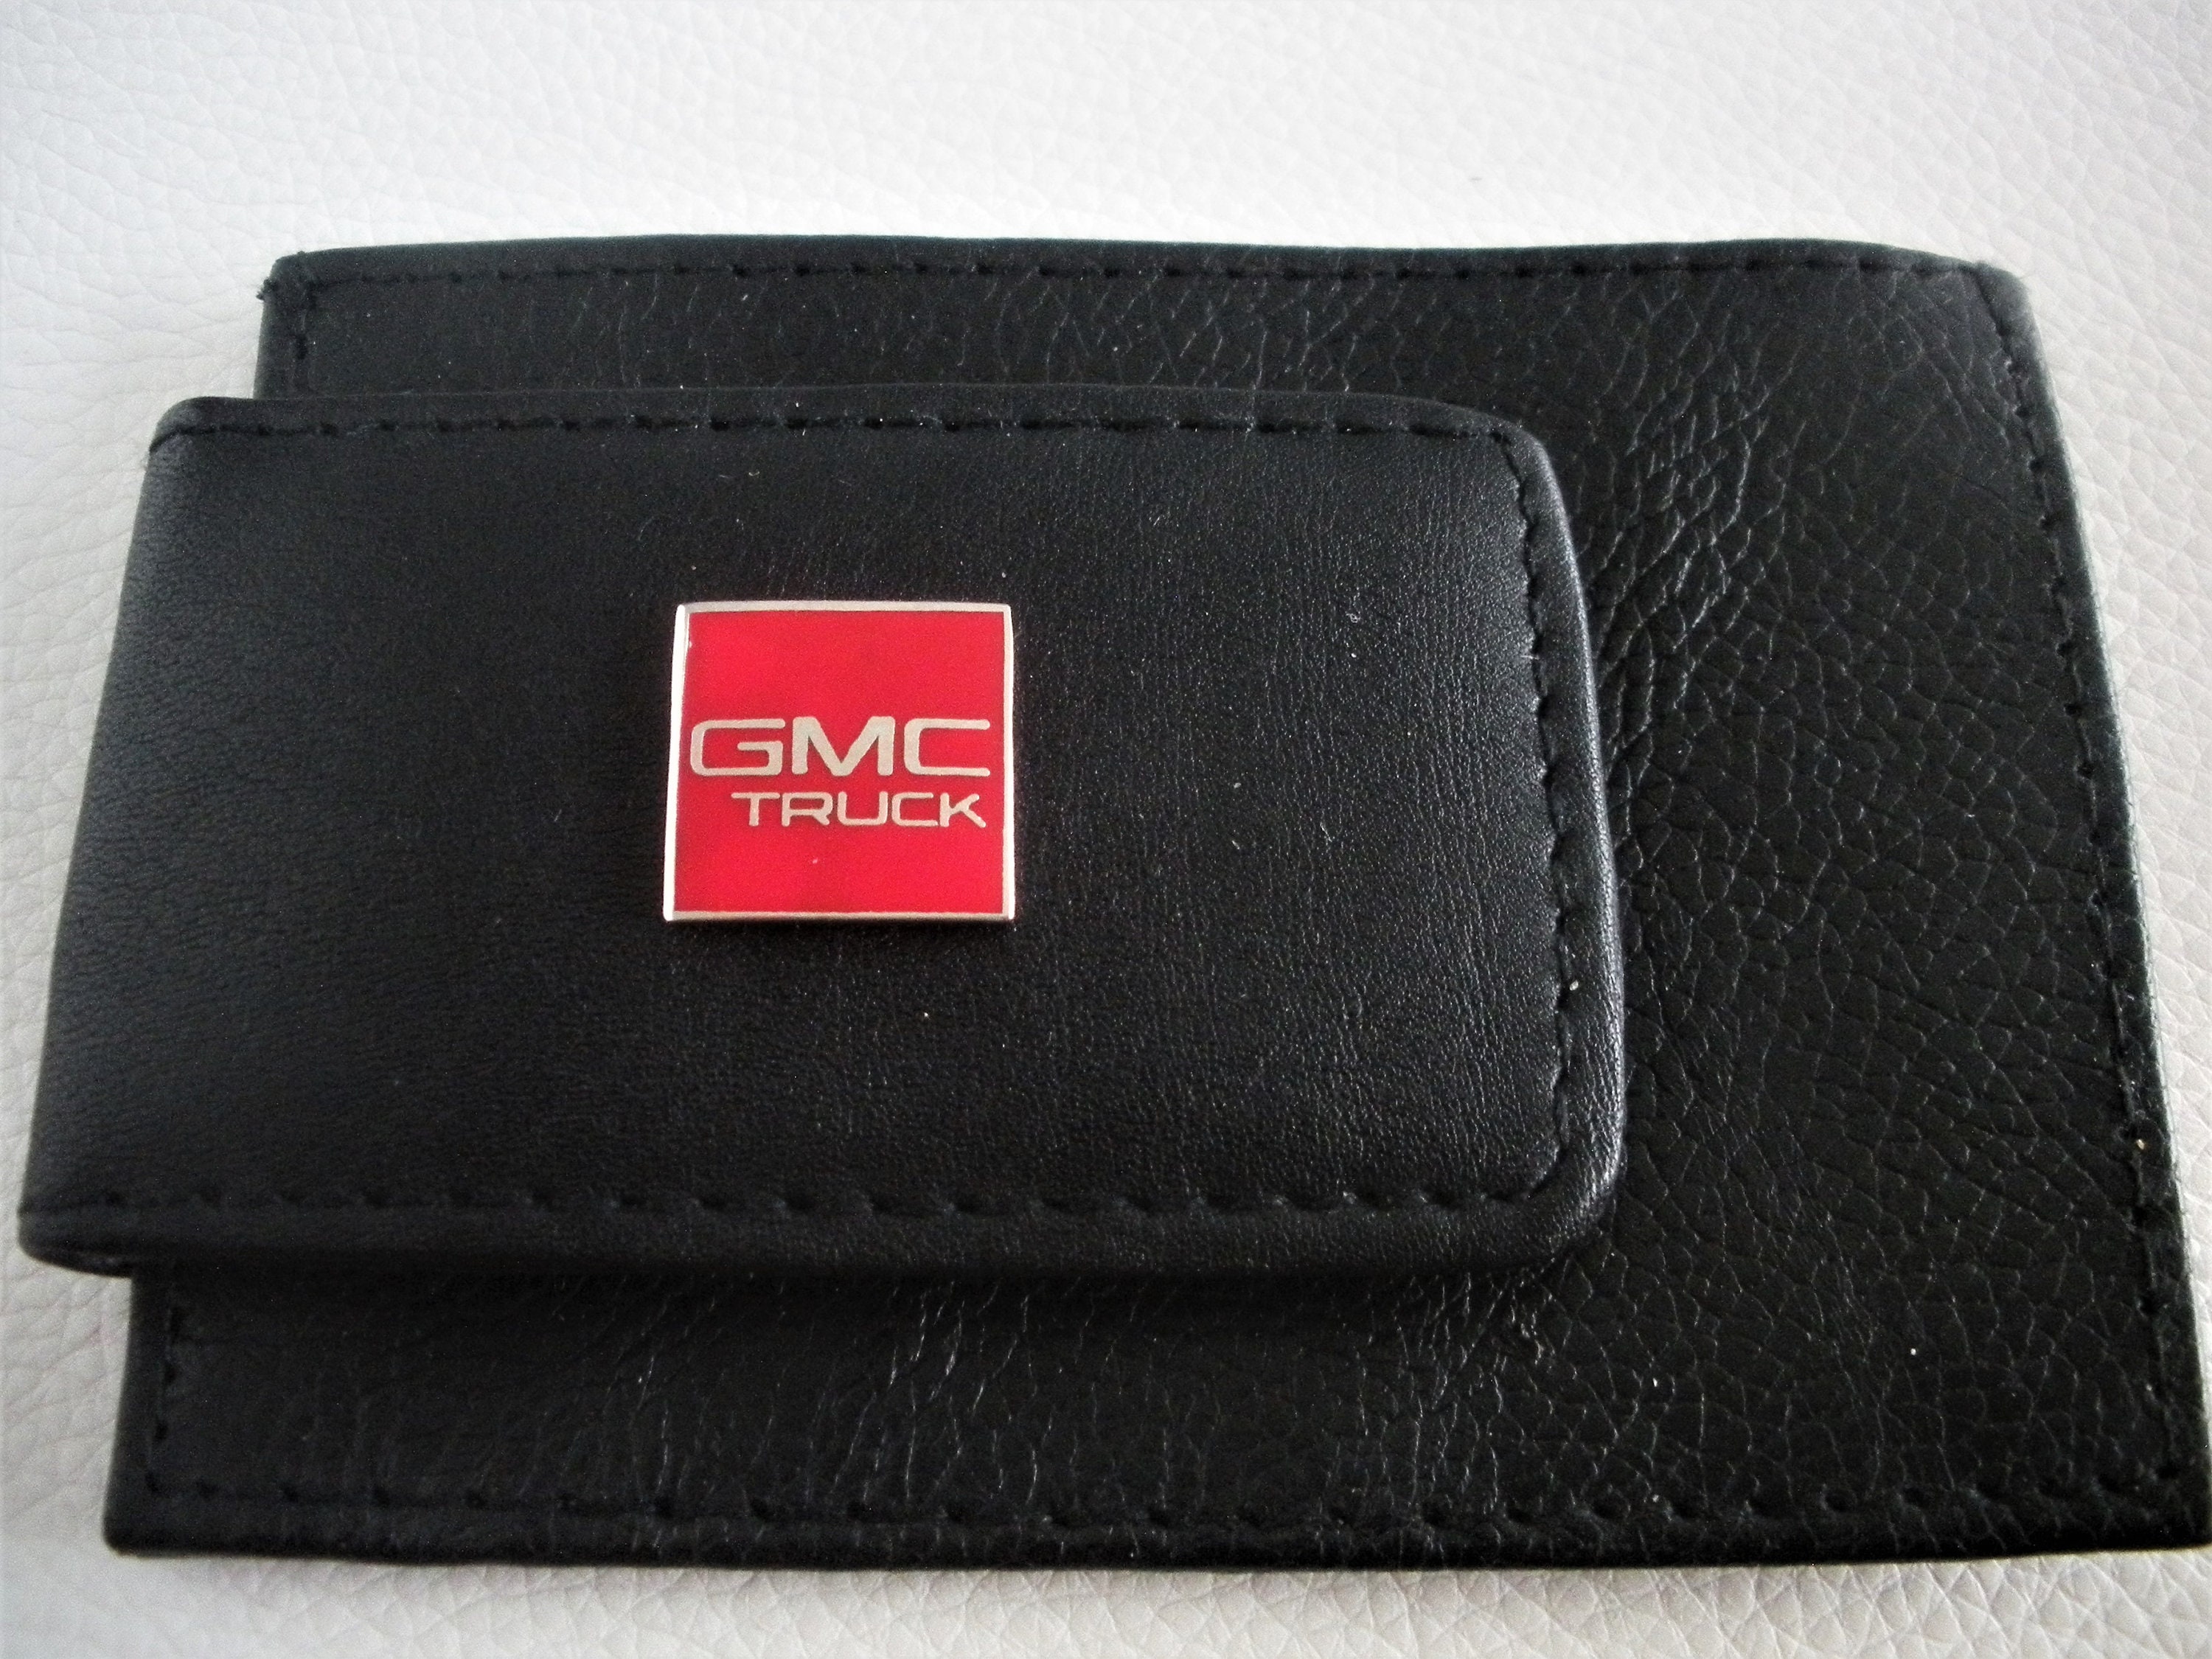 GMC Leather Magnetic Money Clip and Credit Card Holder Great Gift for  Birthdays, , Christmas Gift, Father's Day, New Car Gift 